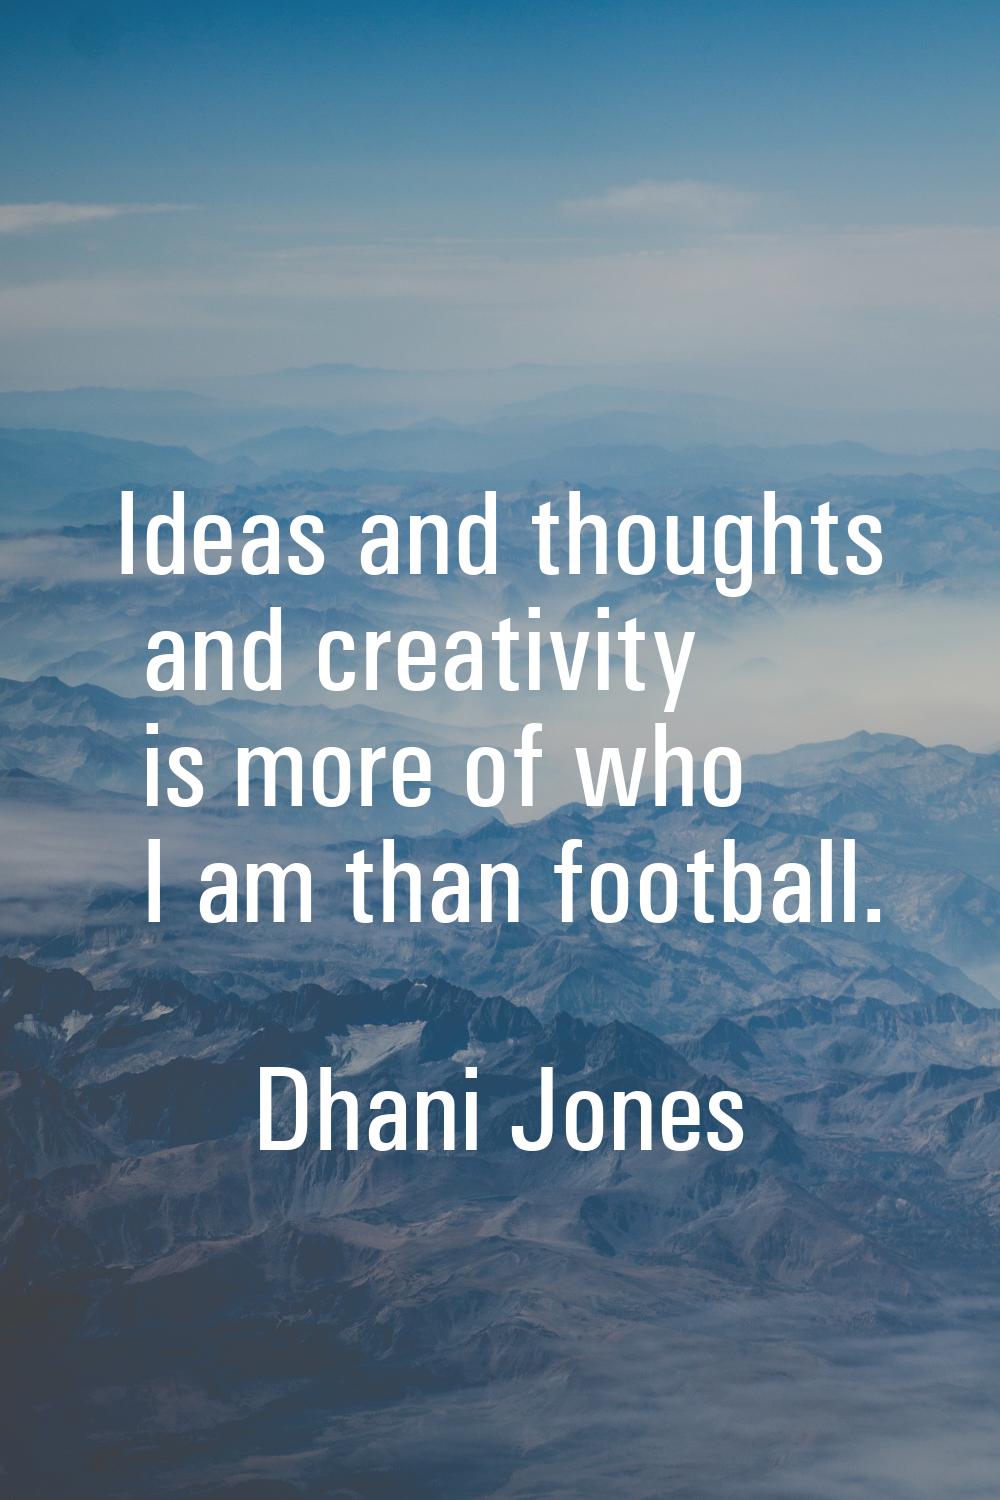 Ideas and thoughts and creativity is more of who I am than football.